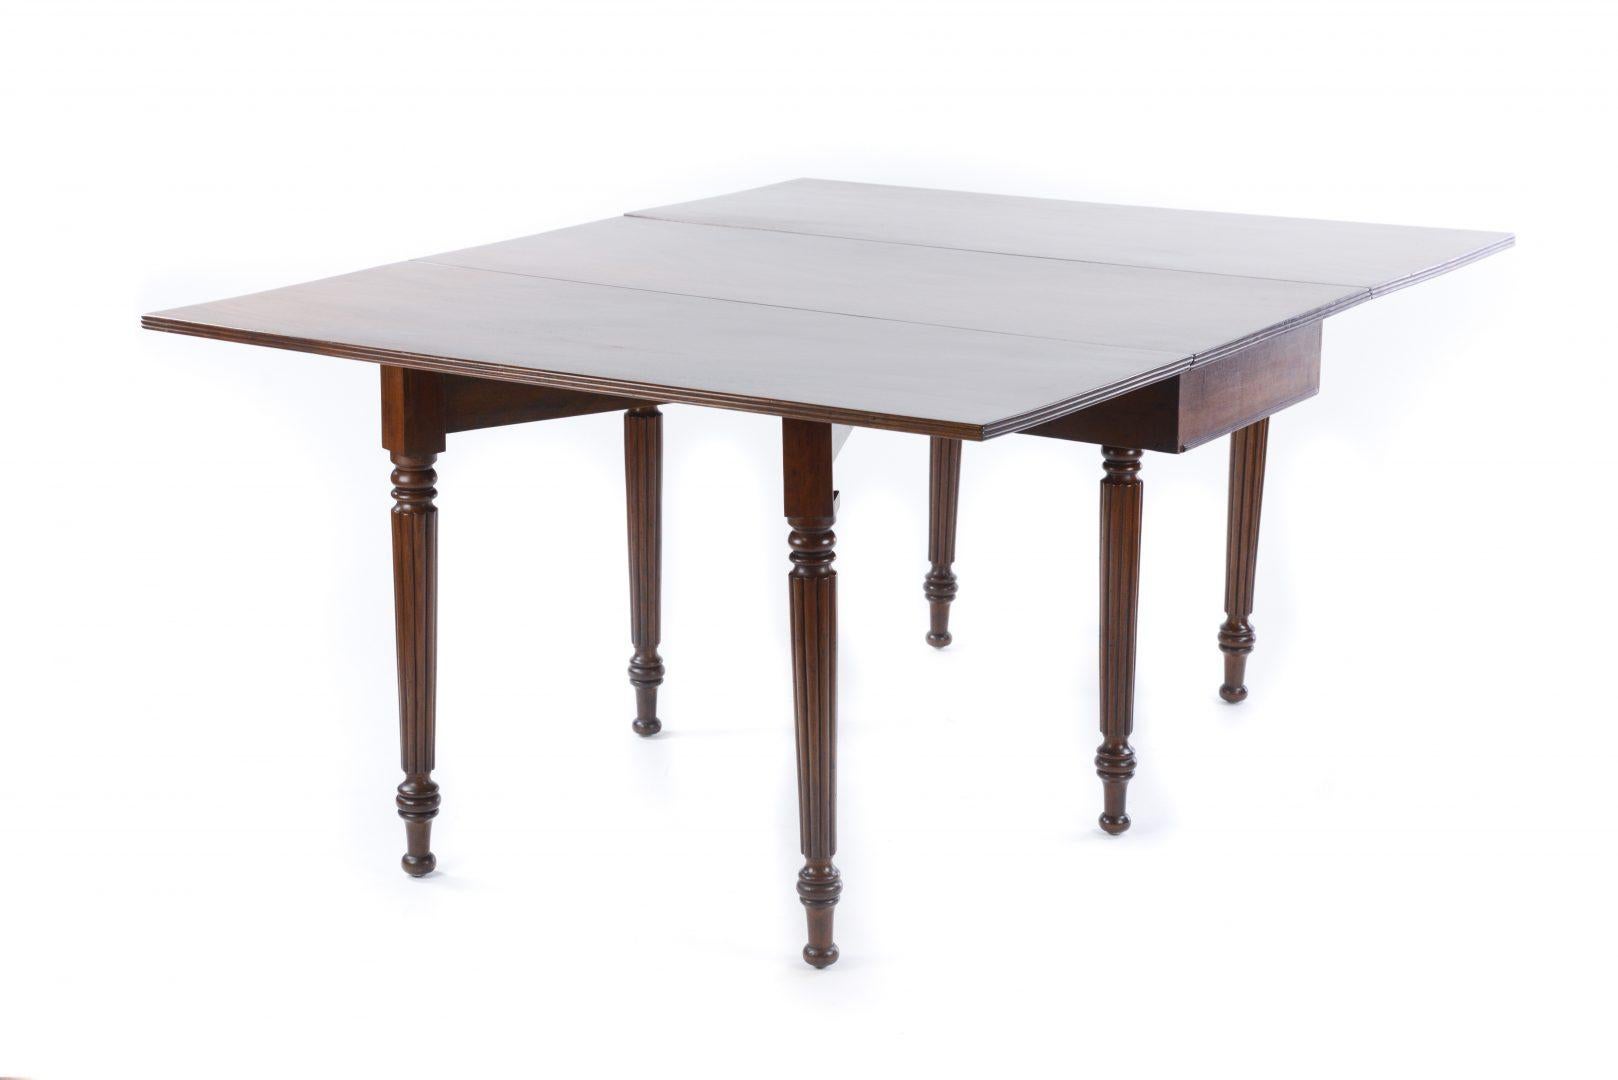 A Regency mahogany drop leaf dining table in the style of Gillows, with drop leaves, raised on fluted supports.

Gillows of Lancaster and London, also known as Gillow & Co., was an English furniture making firm based in Lancaster, Lancashire, and